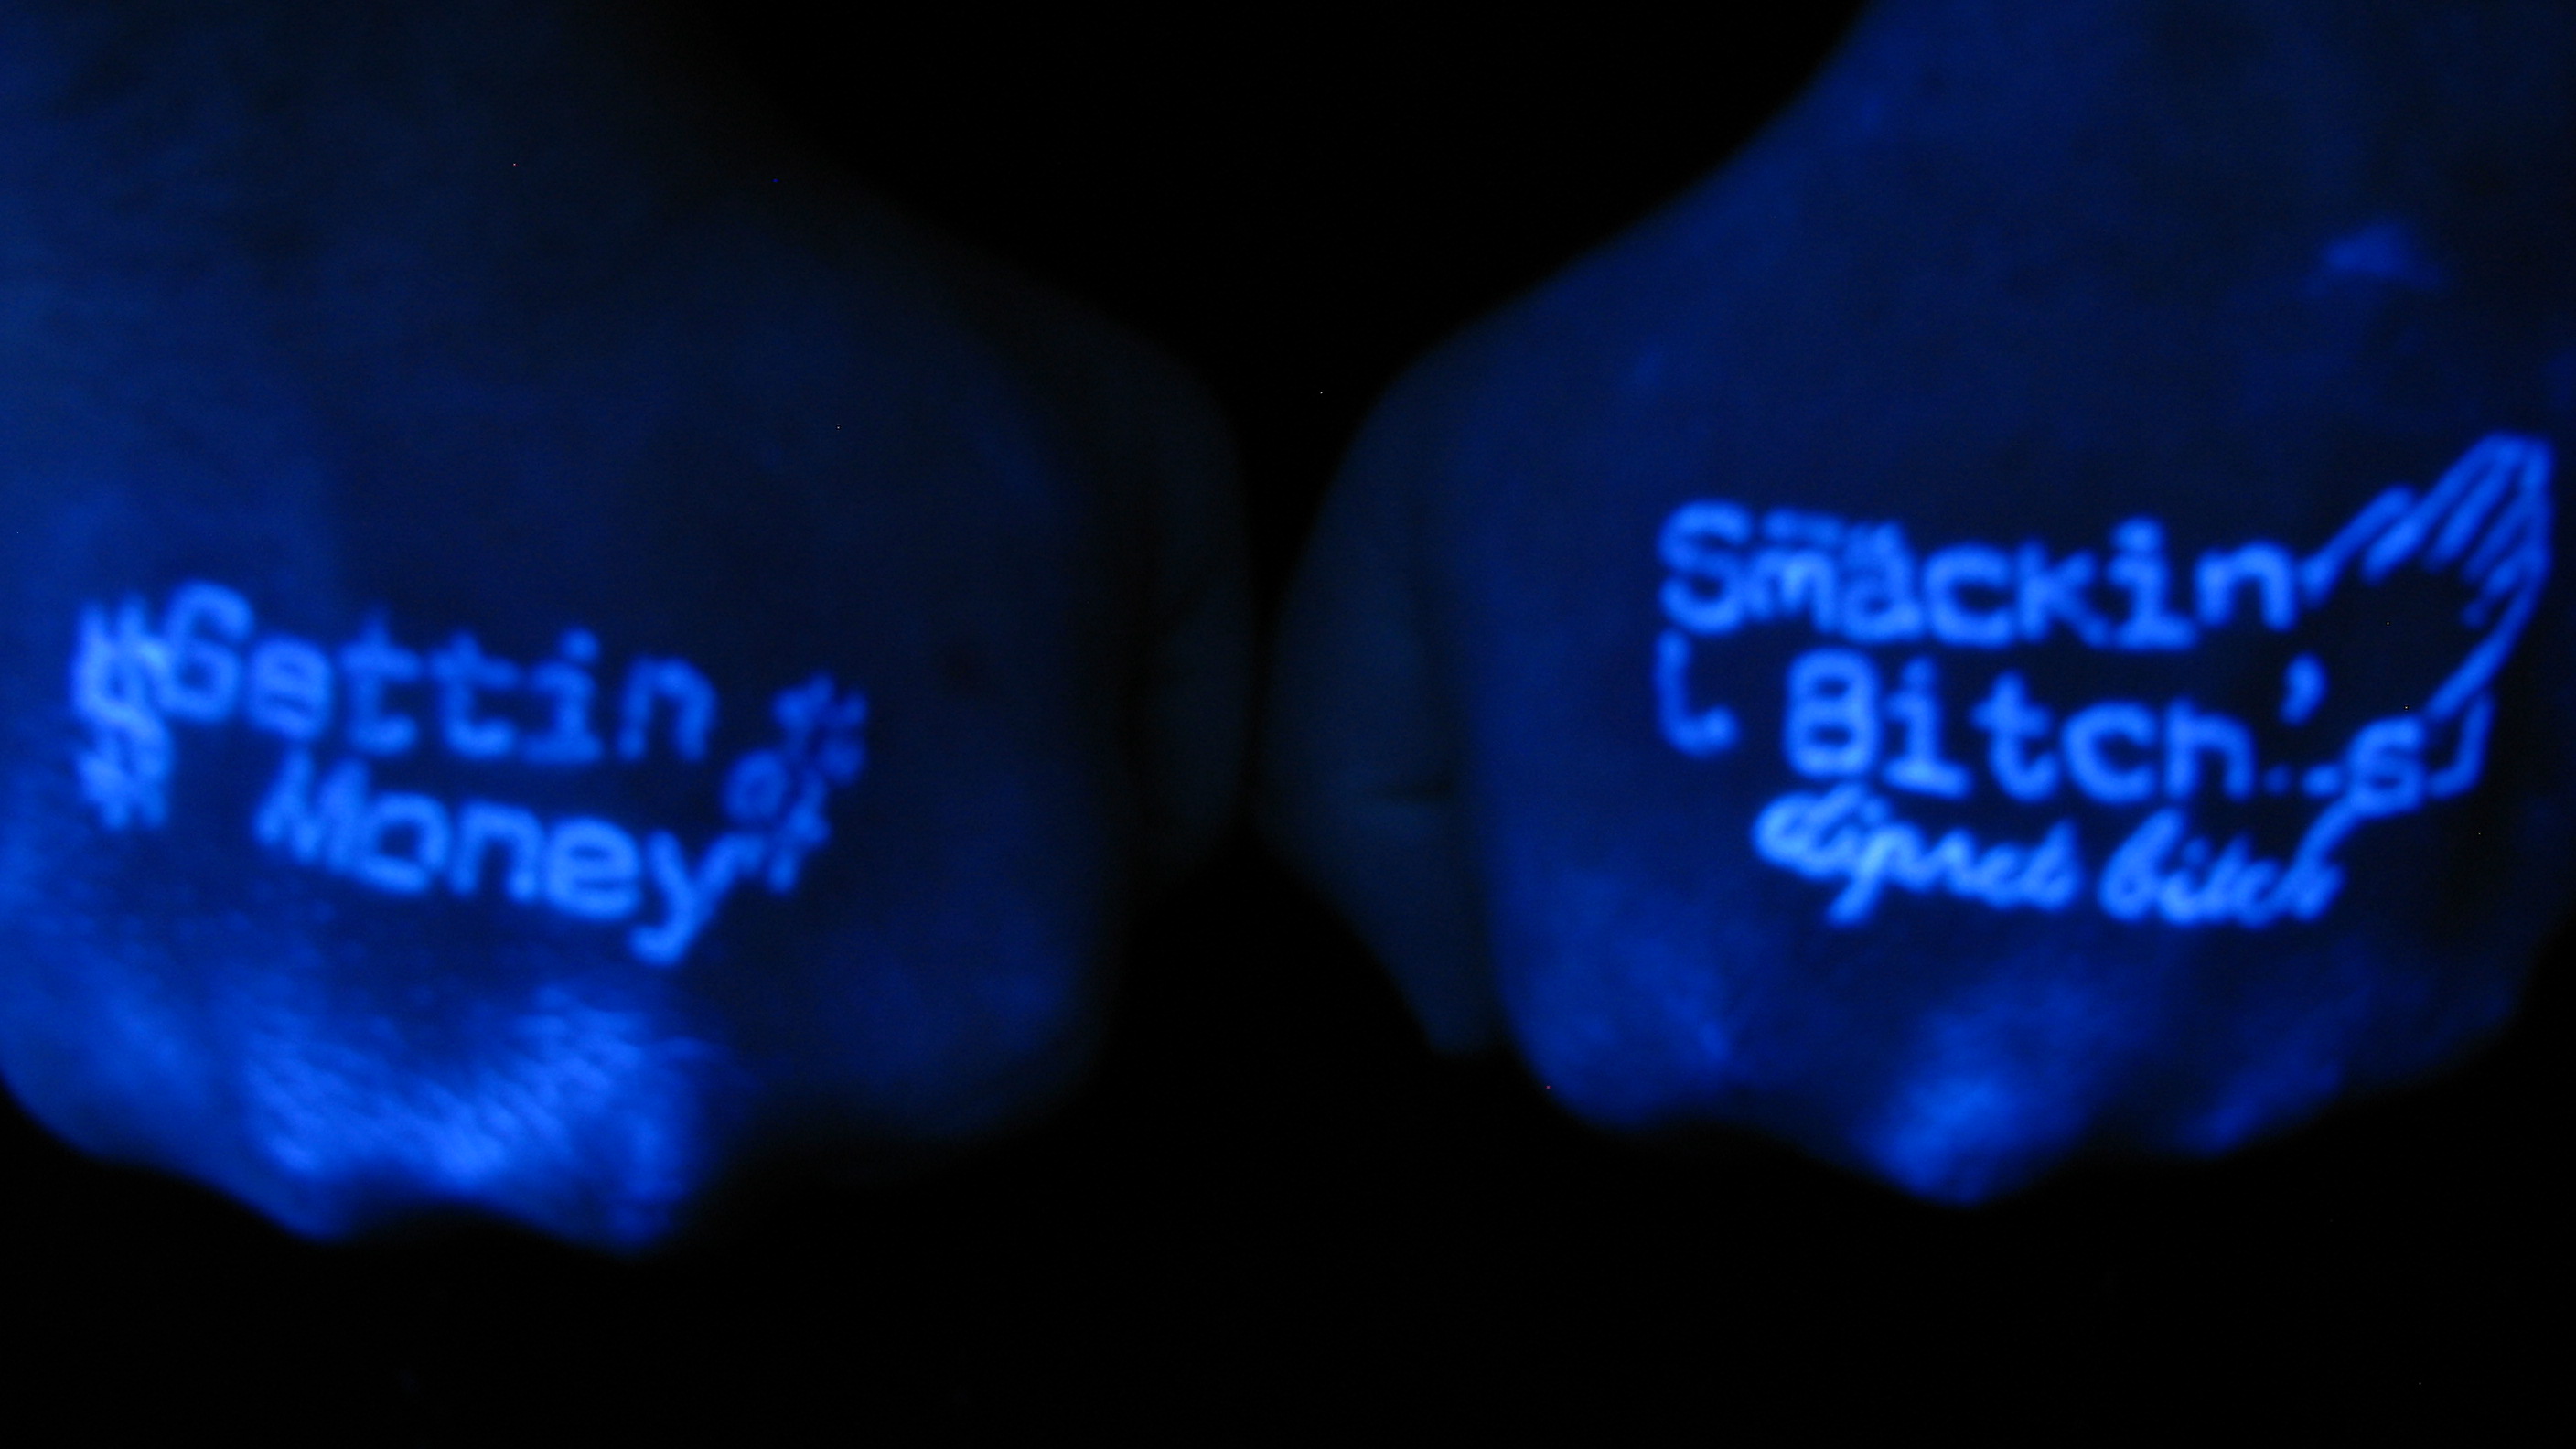 "Smackin Bitches" on one hand, and "Gettin Money" on the other hand done in Invisible Black light ink